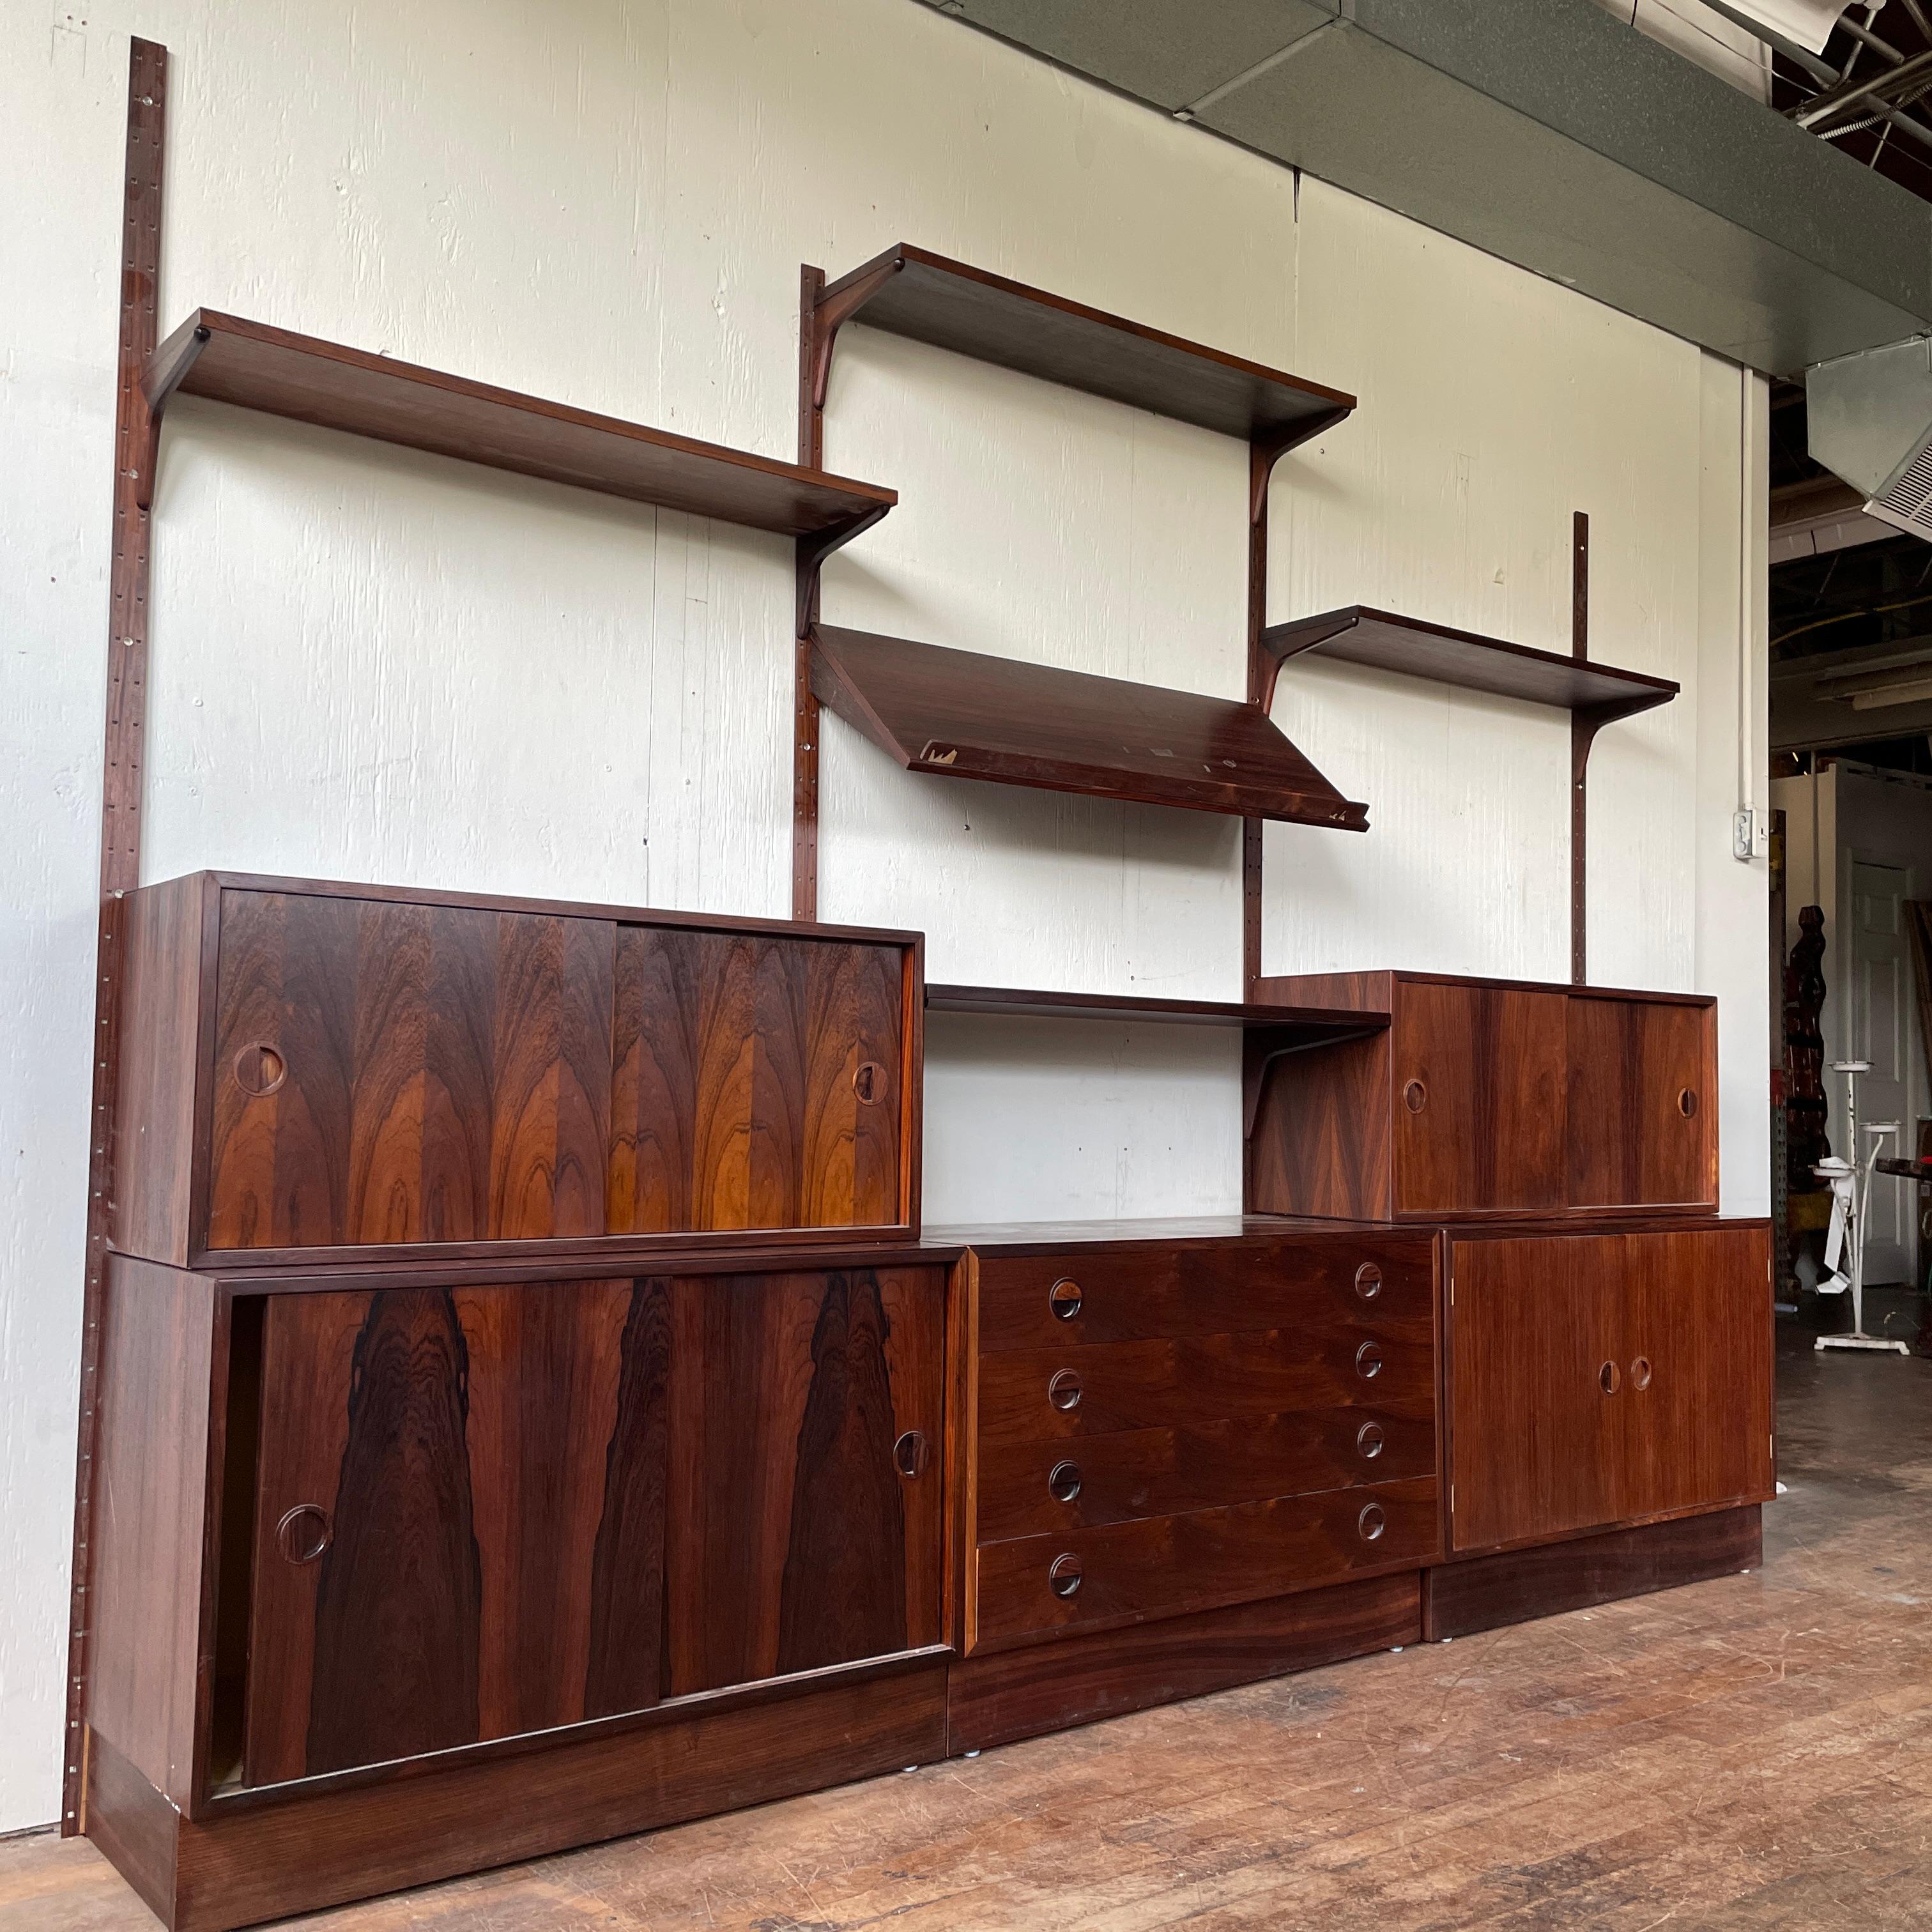 A gorgeous 1960s Hundevad modular wall unit in rosewood complete with shelves, brackets, case pieces, and even the original paper catalog. Set this unit up however best fits your home and enjoy the beauty and convenience of an authentic vintage wall